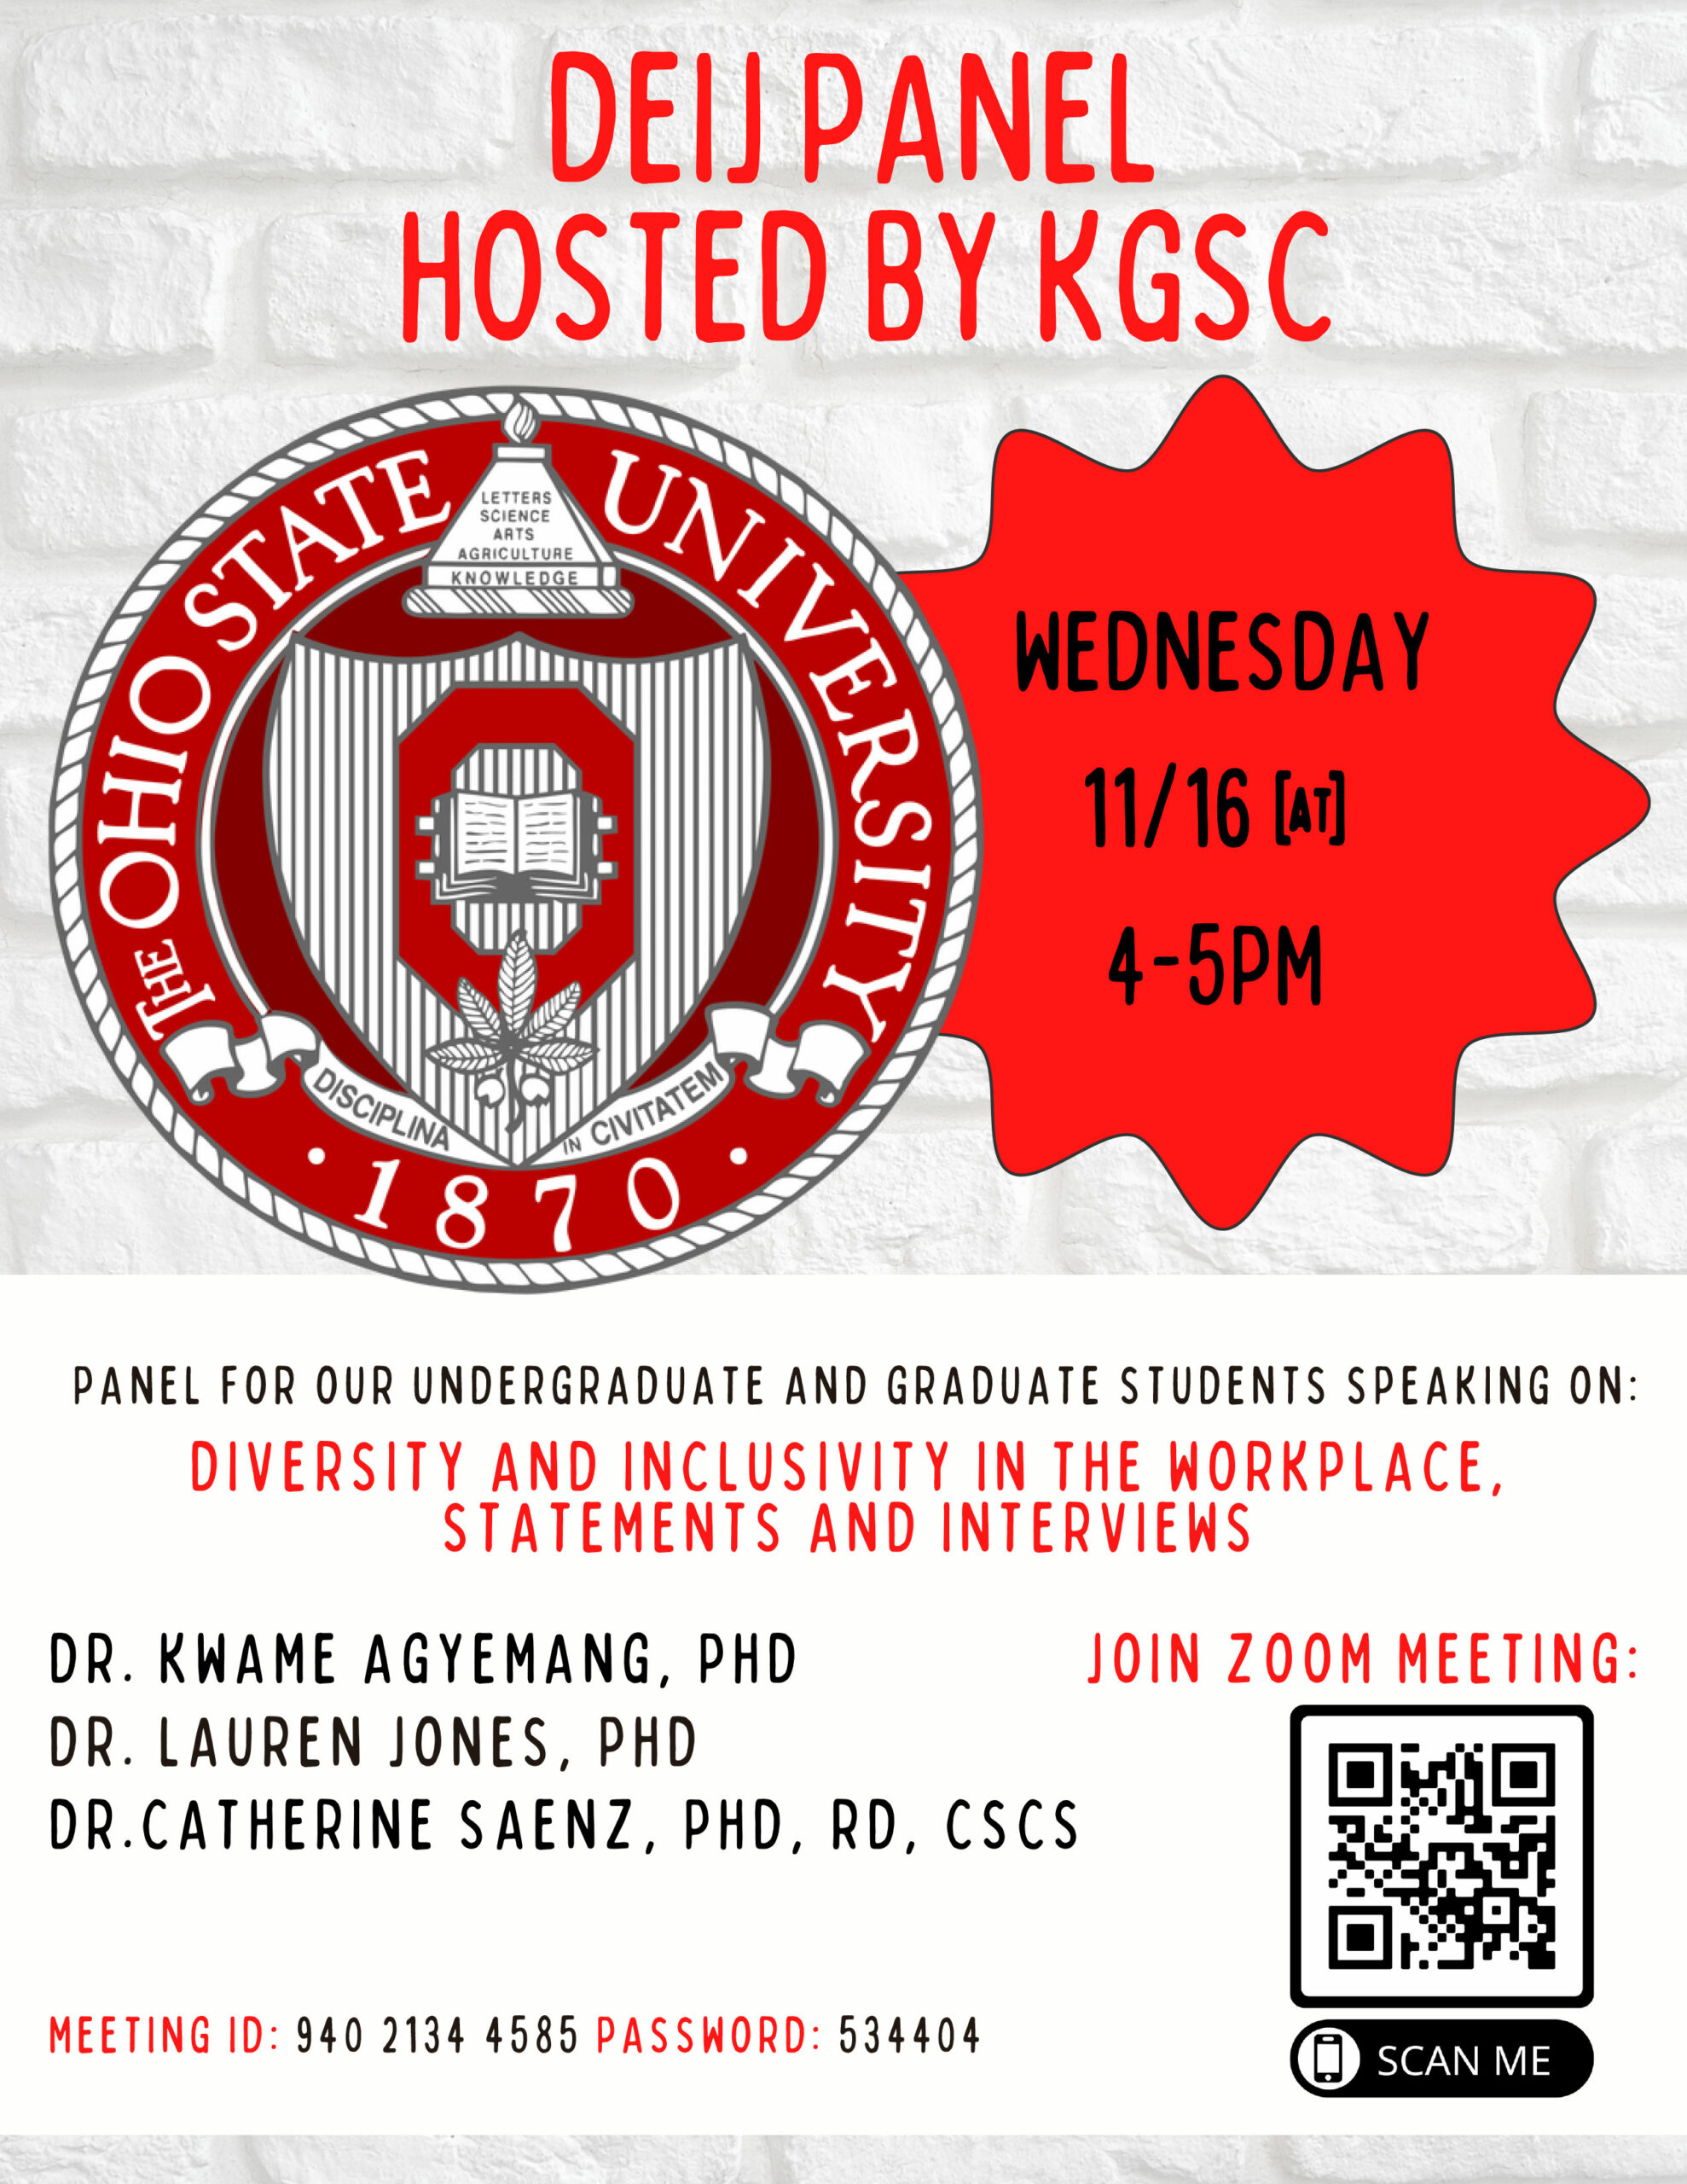 DEIJ PANEL HOSTED BY KGSC WEDNESDAY 11/16 AT 4-5PM Panel for our Undergraduate and Graduate Students Speaking on: Diversity and Inclusivity in the workplace, statements and interviews. DR. KWAME AGYEMANG, PHD DR. LAUREN JONES, PHD DR. CATHERINE SAENZE, PHD, RD, CSCS JOIN ZOOM MEETING MEETING ID 940 2134 4585 PASSWORD: 534404